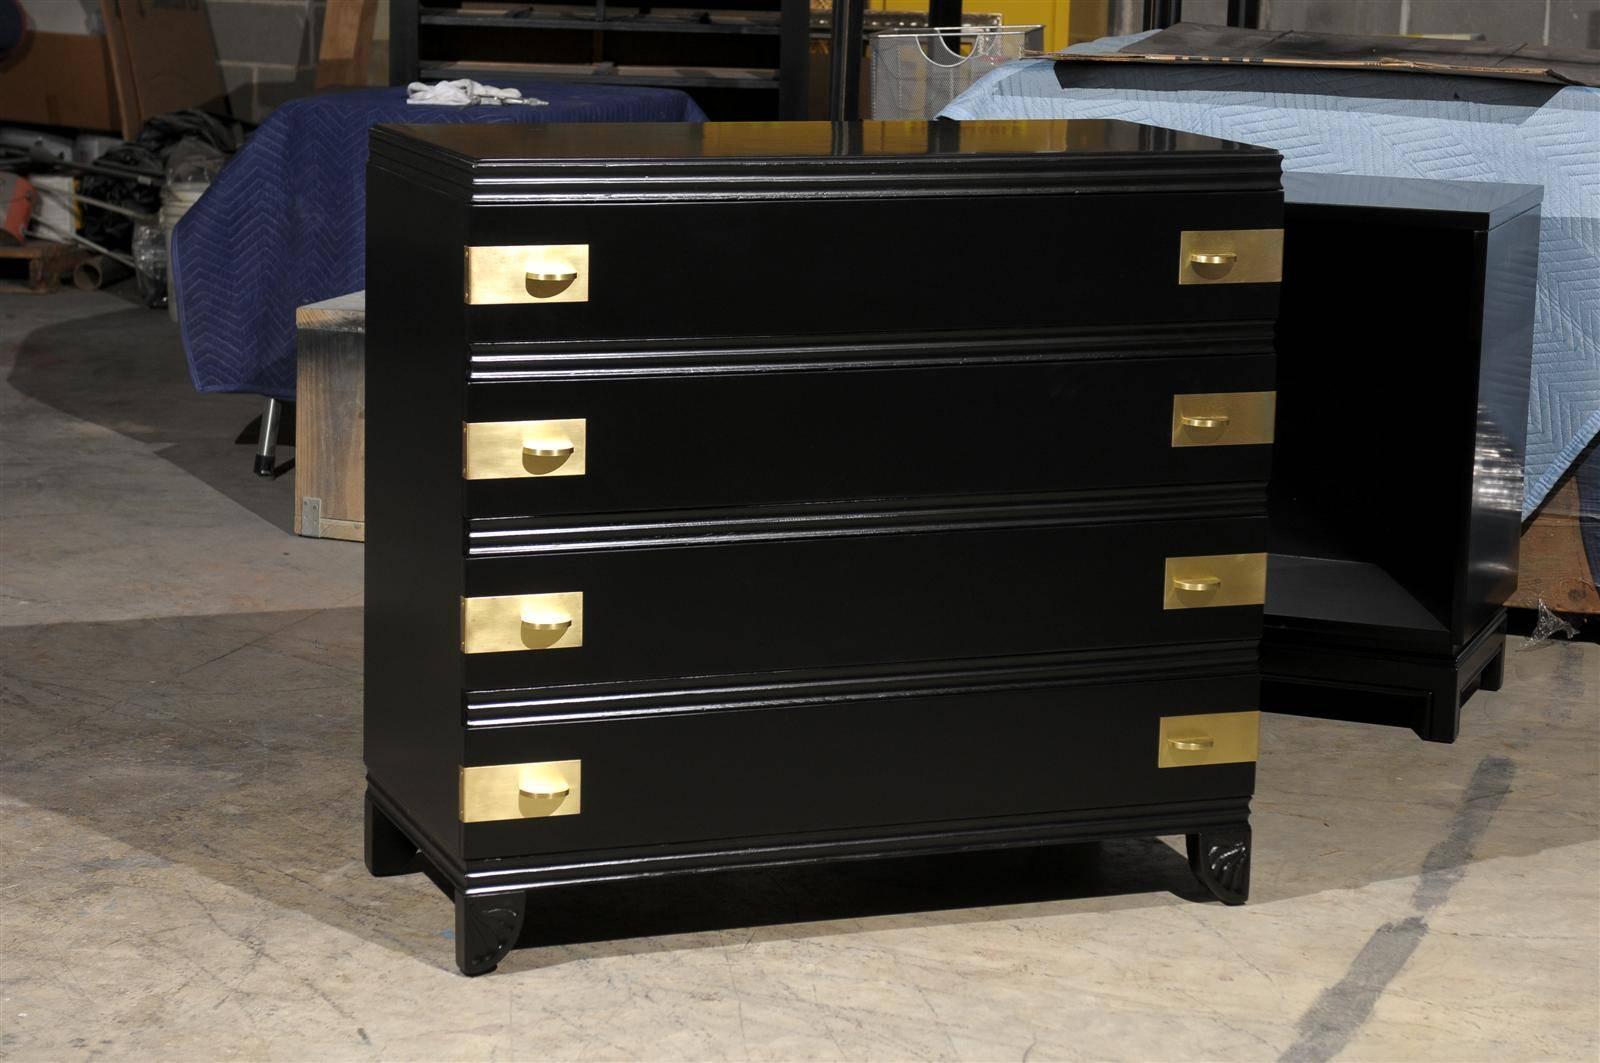 An elegant, rare four (4) drawer chest by Widdicomb (Series number 1110) introduced in 1938. Gorgeous, expertly crafted mahogany case construction with wonderful lines and fabulous foot detail.  The drawers are marked with sublime solid brass